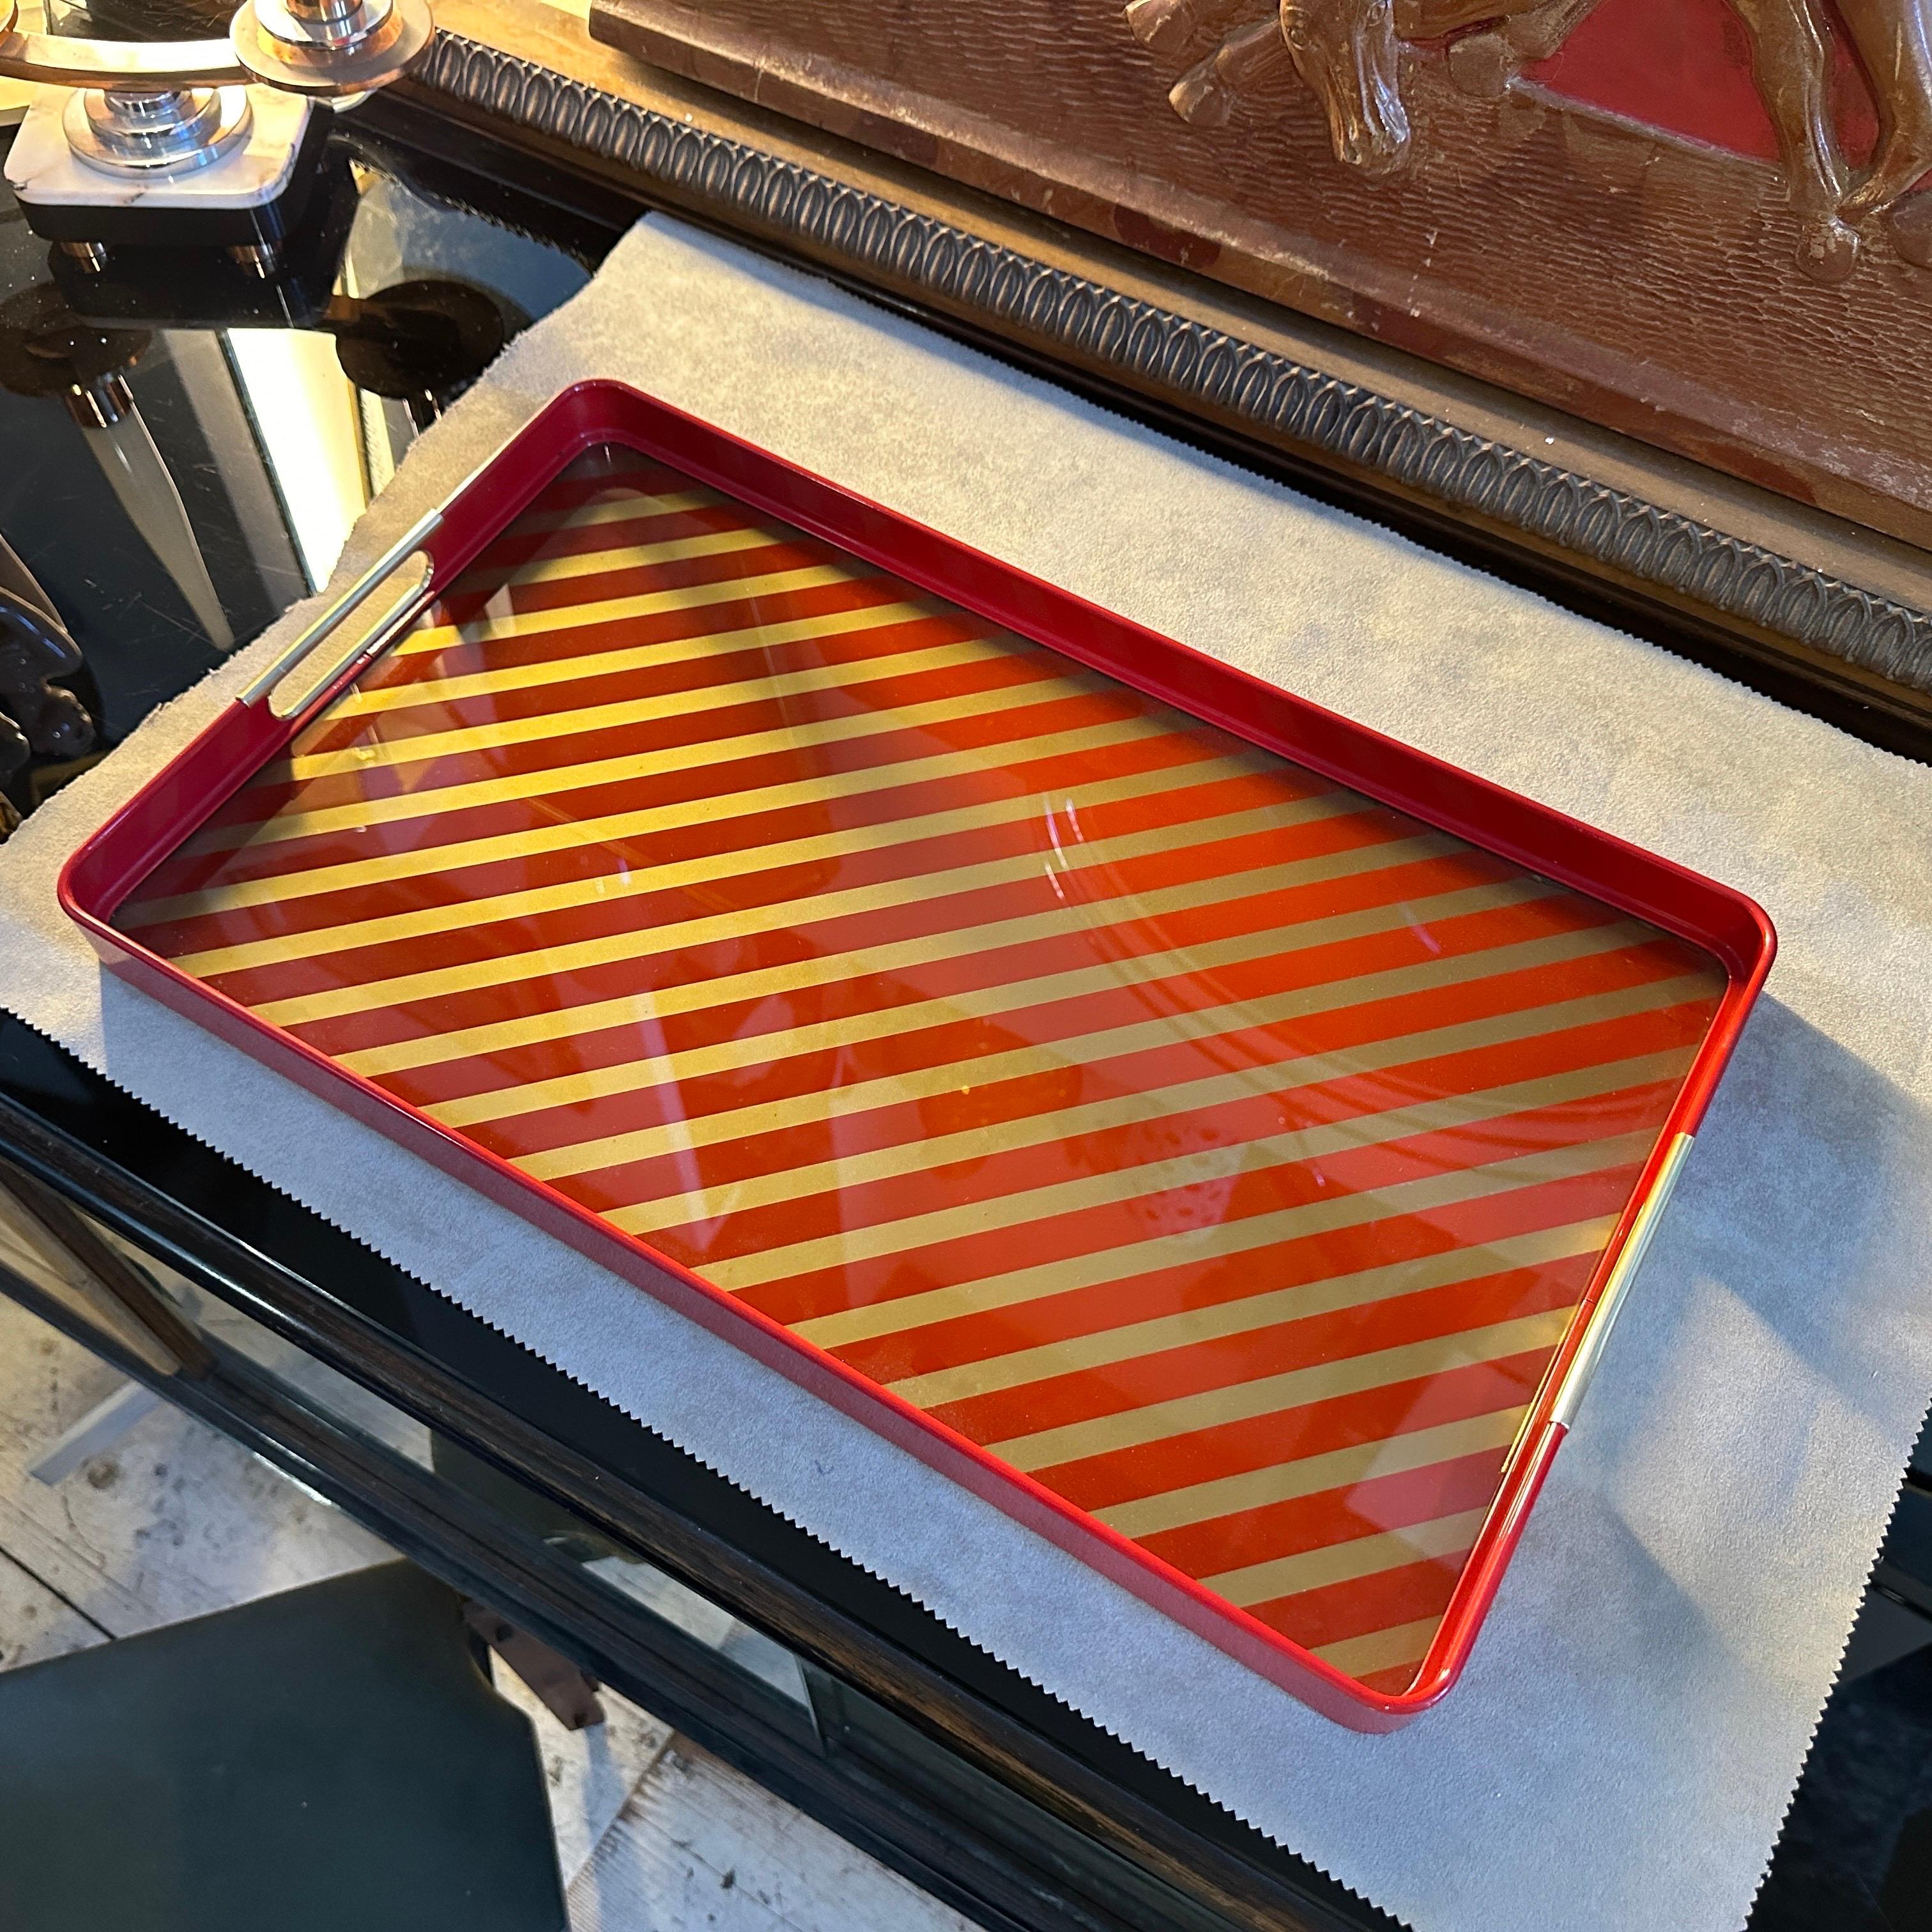 1960s Mid-Century Modern Red and Gold Painted Metal Rectangular Italian Tray For Sale 5